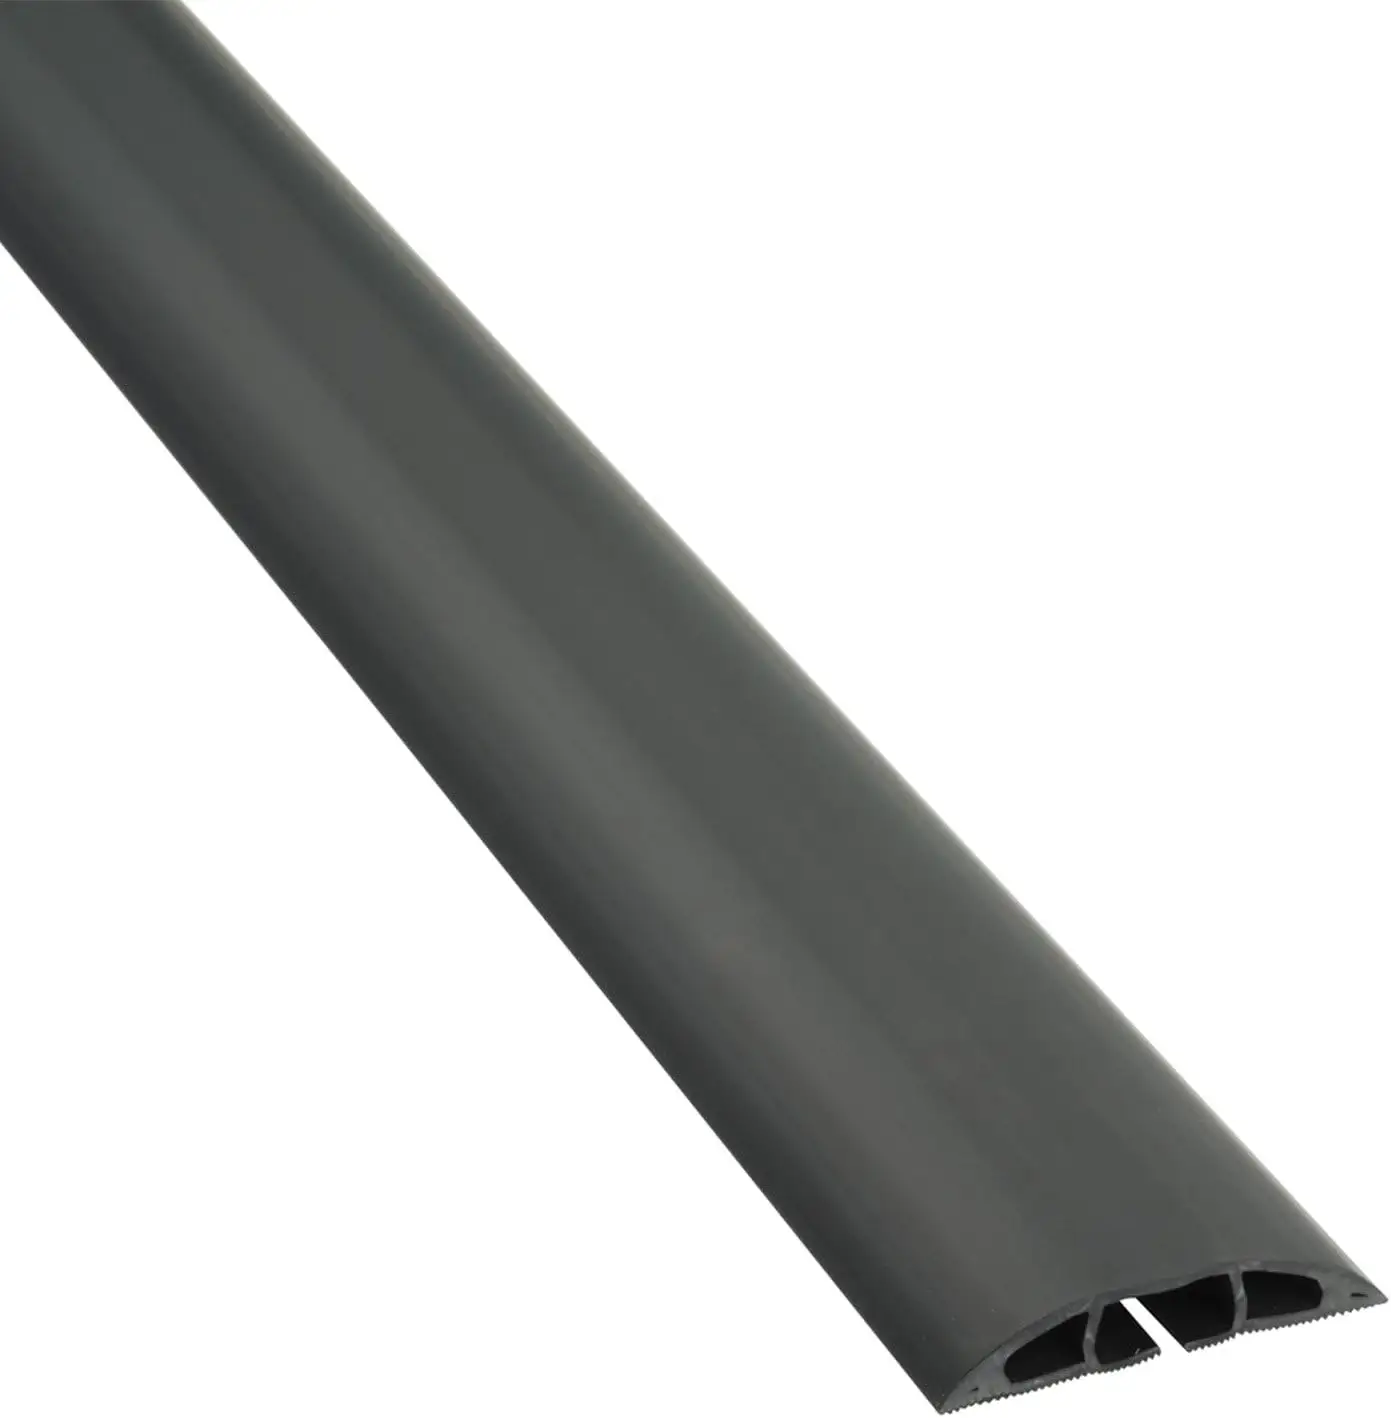 Parede branca Montada Arco Piso Cabo Canal Tidy Pvc Cord Cover Industrial Floor Trunking